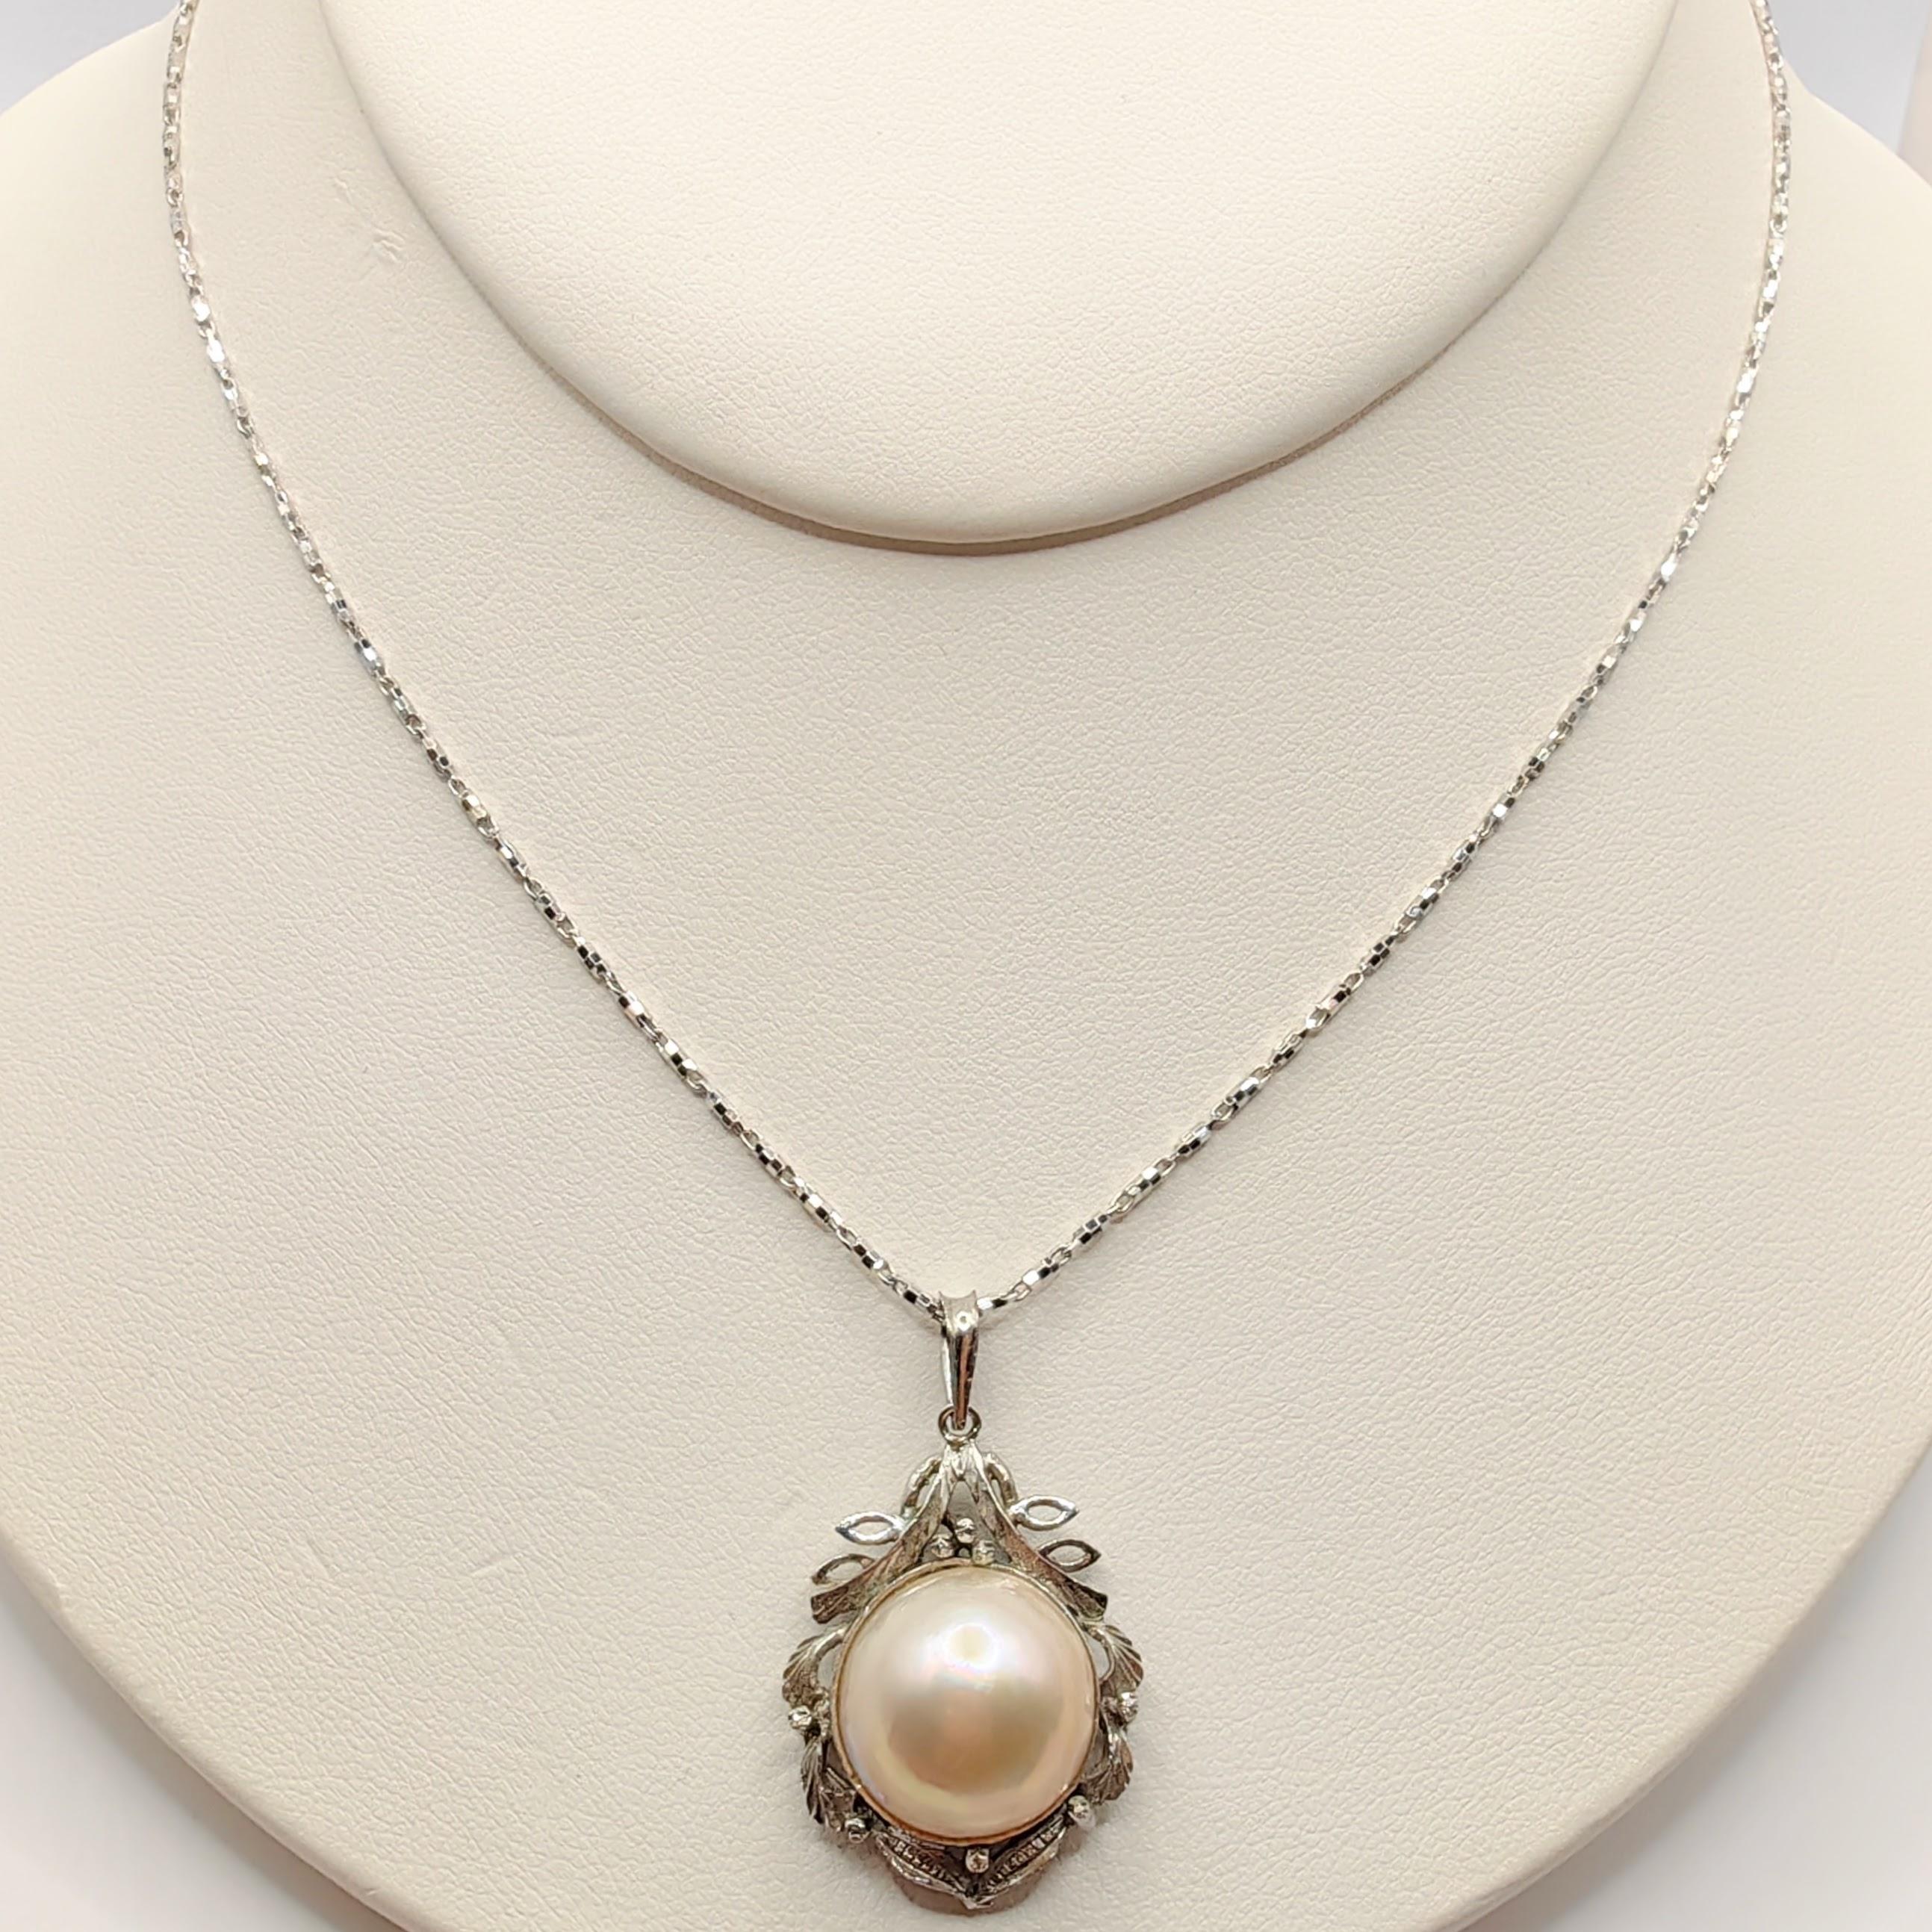 Vintage Baroque Style 14mm Mabé Pearl Necklace Pendant in Sterling Silver For Sale 2